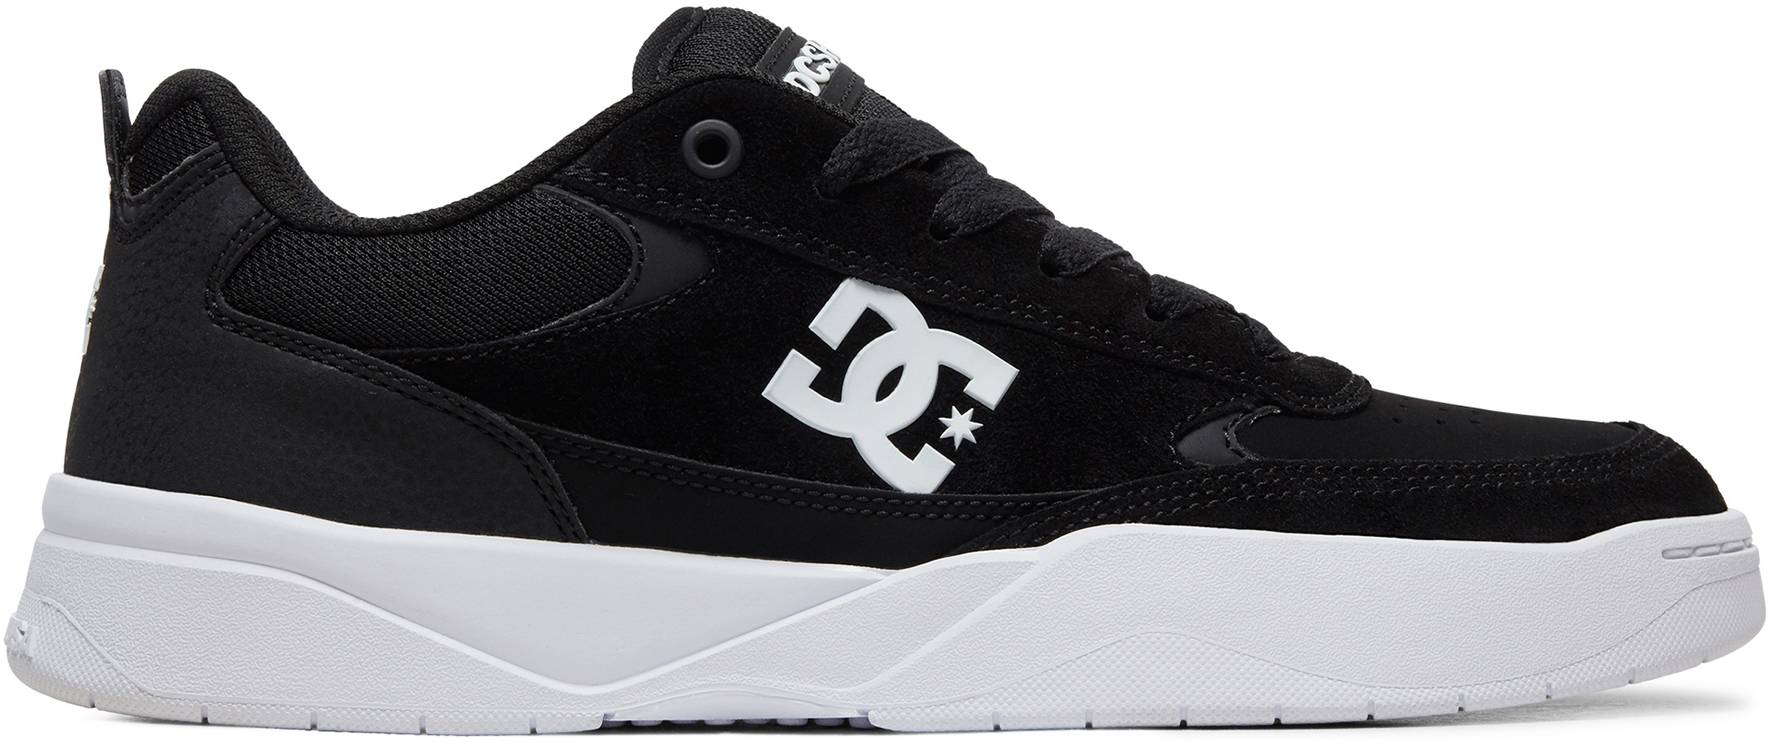 are dc good skate shoes